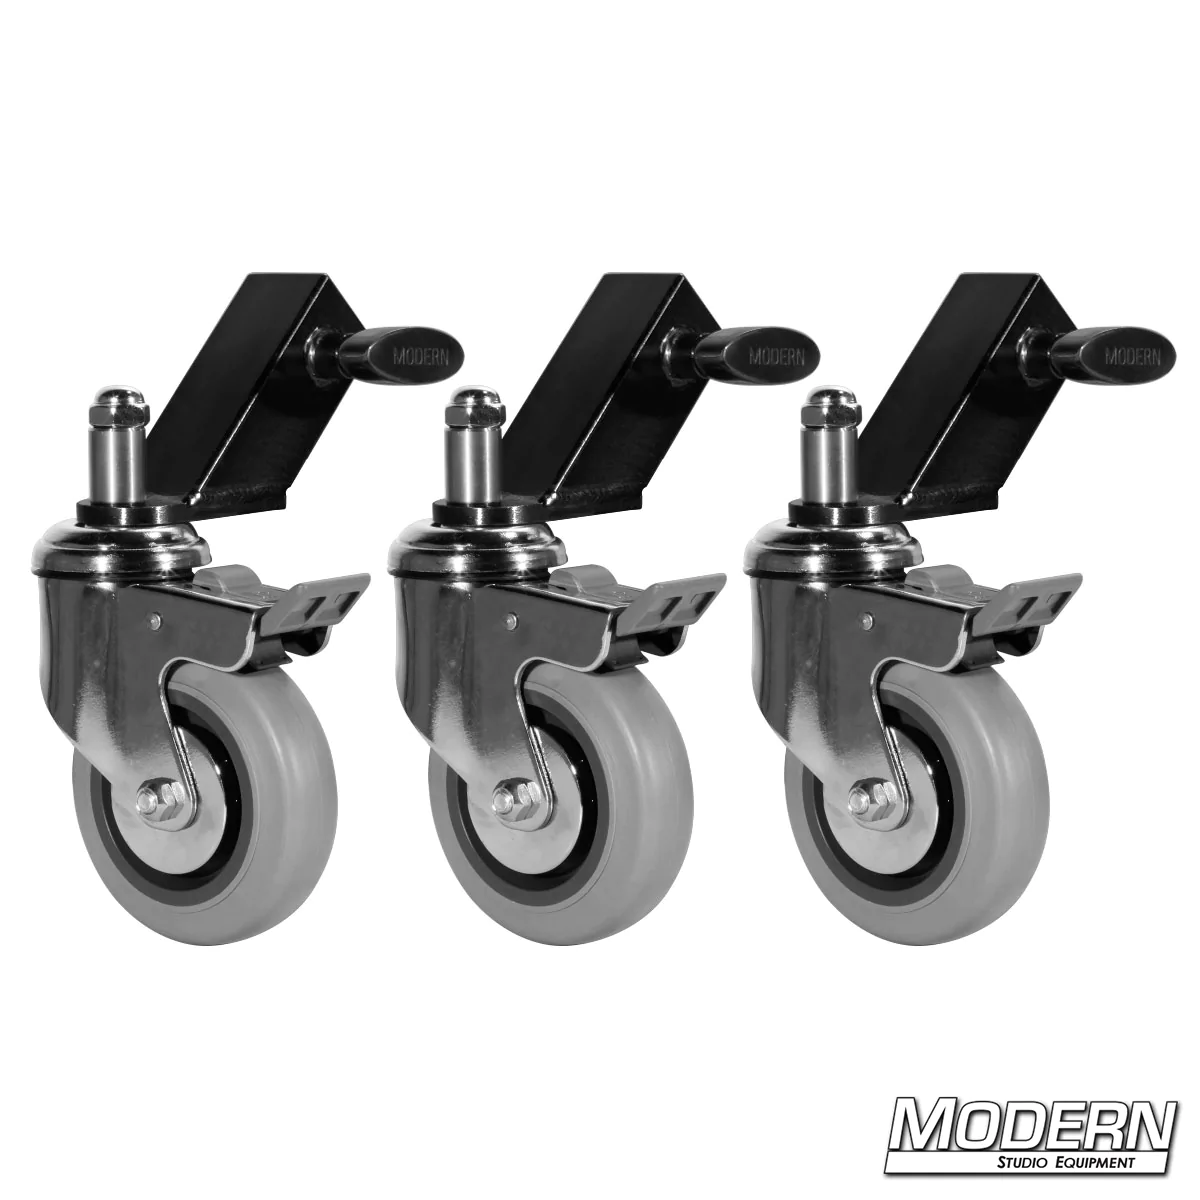 Wheels for Mambo Stands (Set of 3 Wheels & Slip on Adapters) - Black Zinc